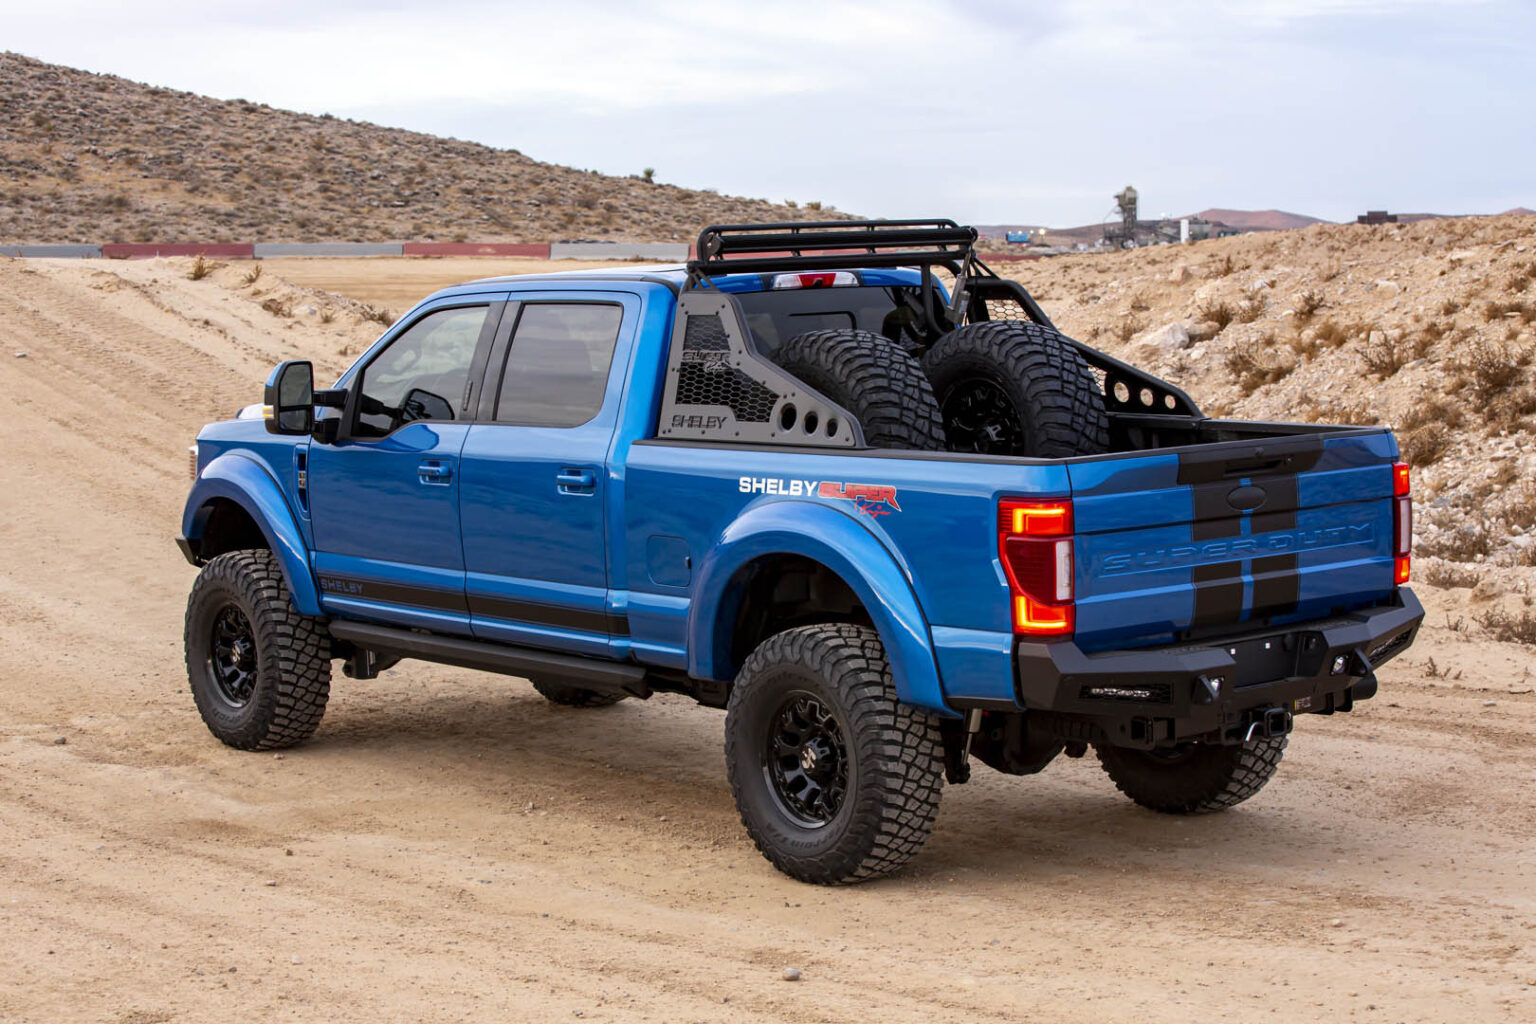 Introducing the AllNew Ford Shelby F250 Super Baja!